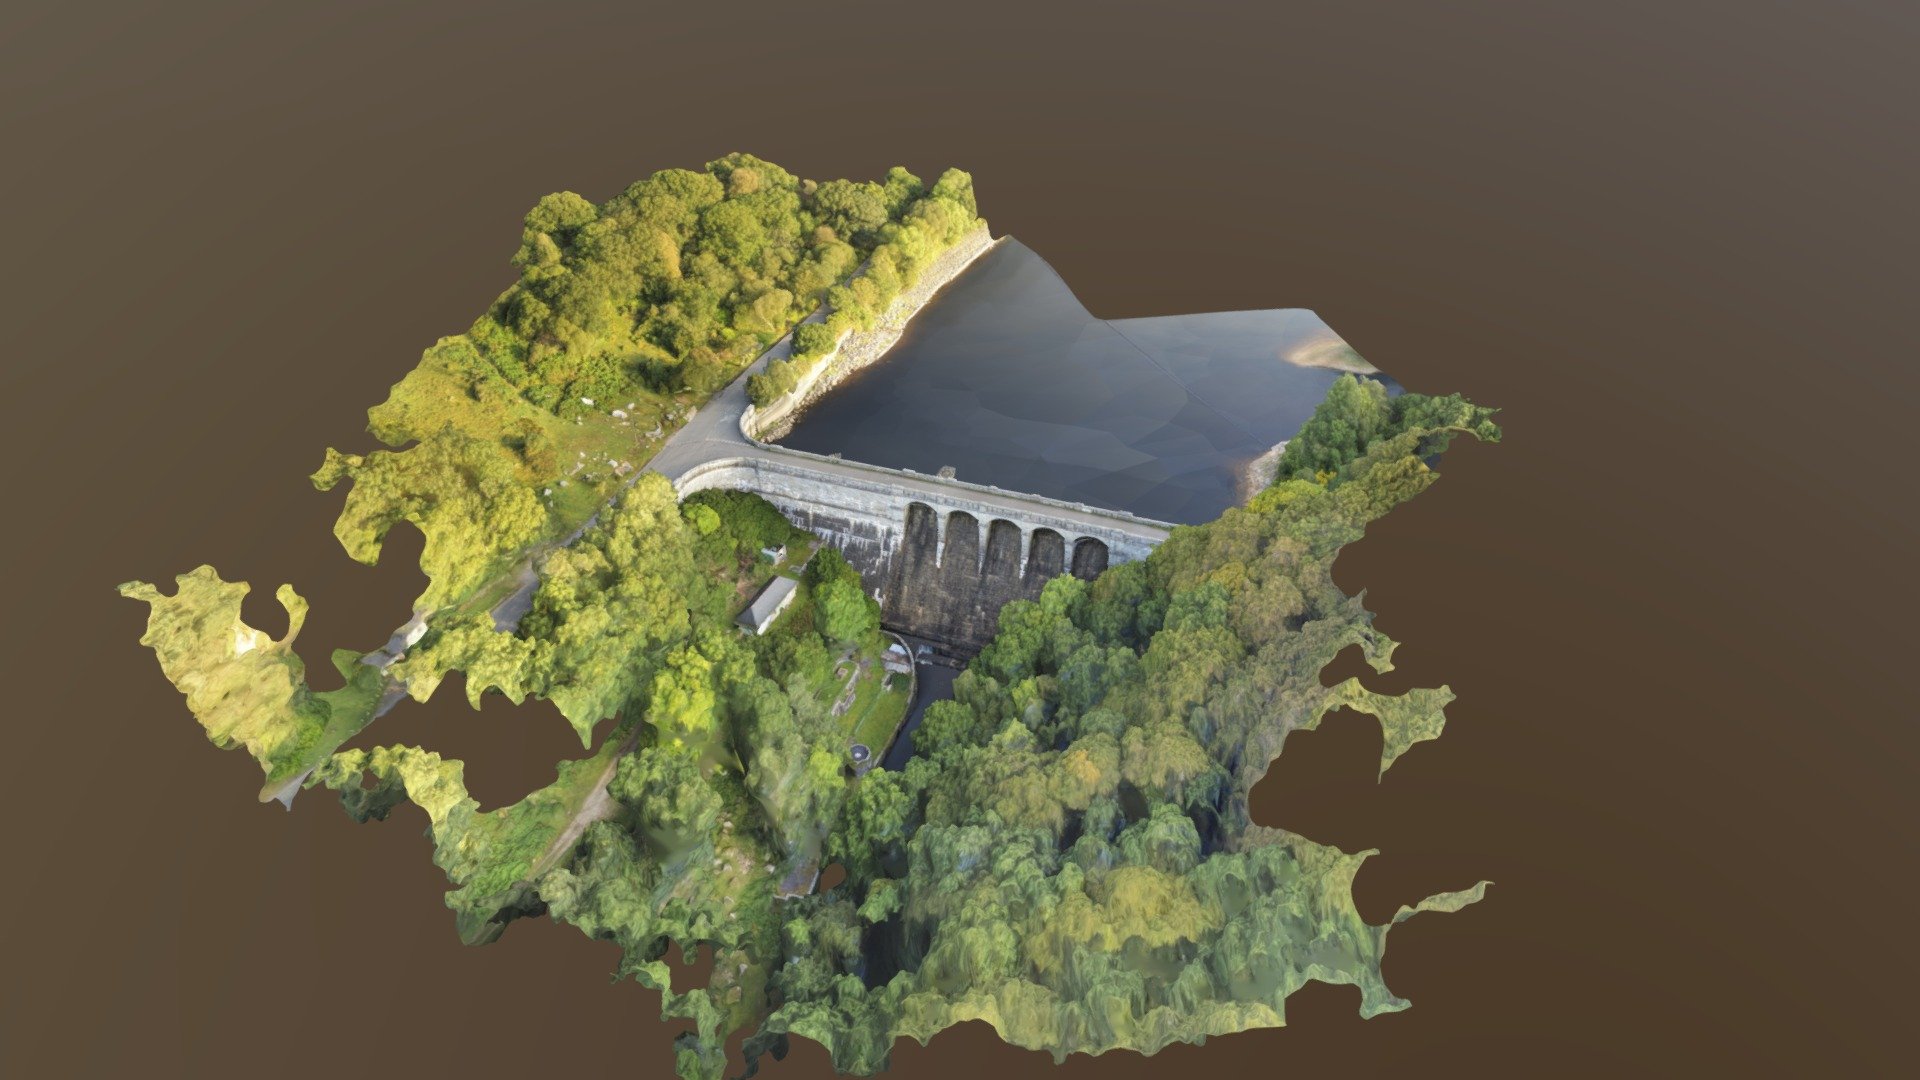 Burrator Reservoir Dam Structure, South Devon

Low Resolution 3D capture of as-built structure from late 19th century: https://en.wikipedia.org/wiki/Burrator_Reservoir

Time to digitise your land? https://www.theblackarrows.co.uk - Burrator Reservoir Dam, South Devon - 3D model by theblackarrows 3d model